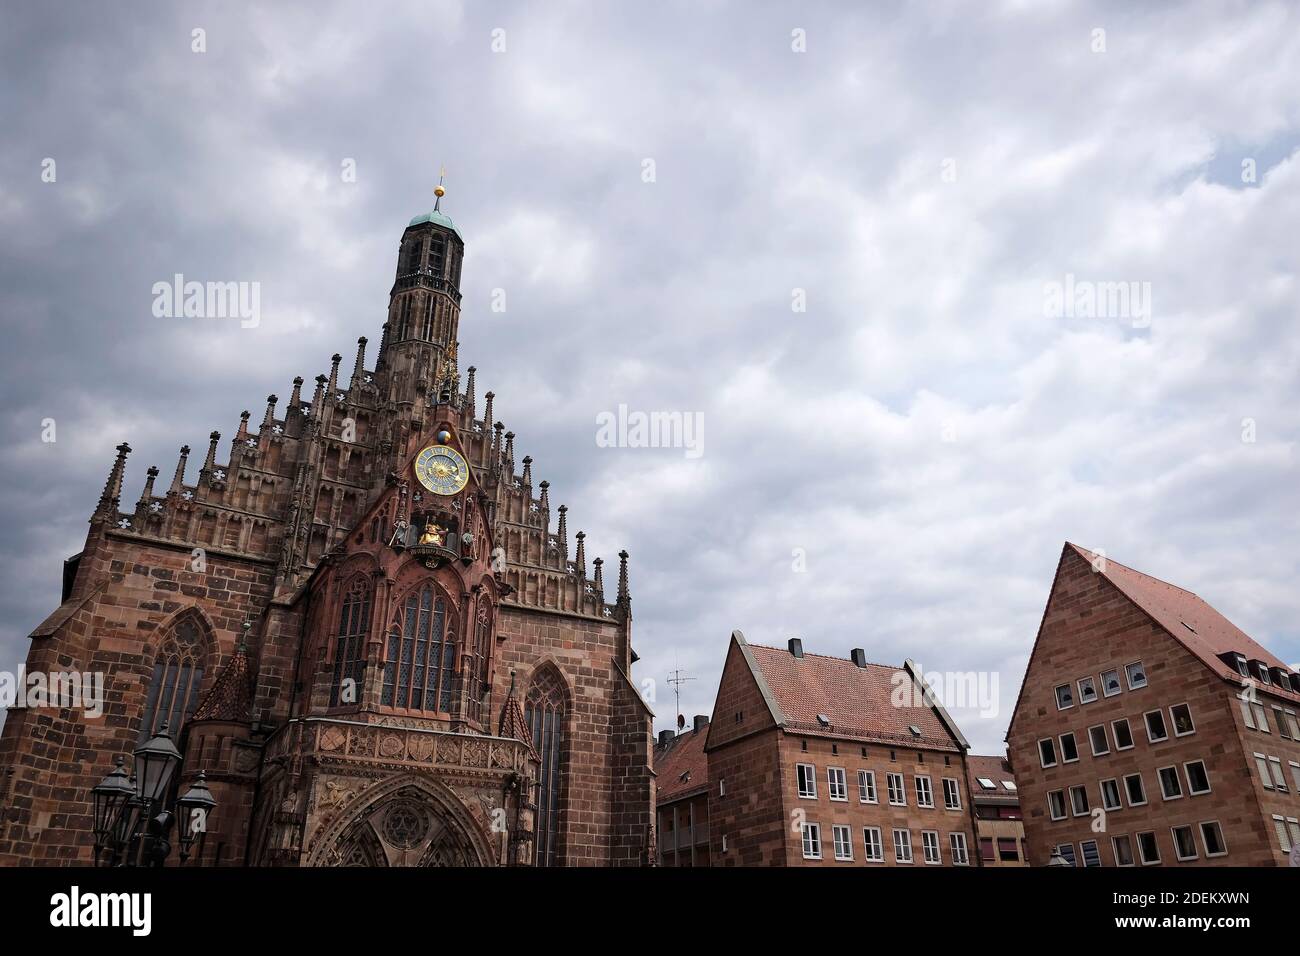 Frauenkirche (Church of Our Lady) in Nuremberg, Germany Stock Photo